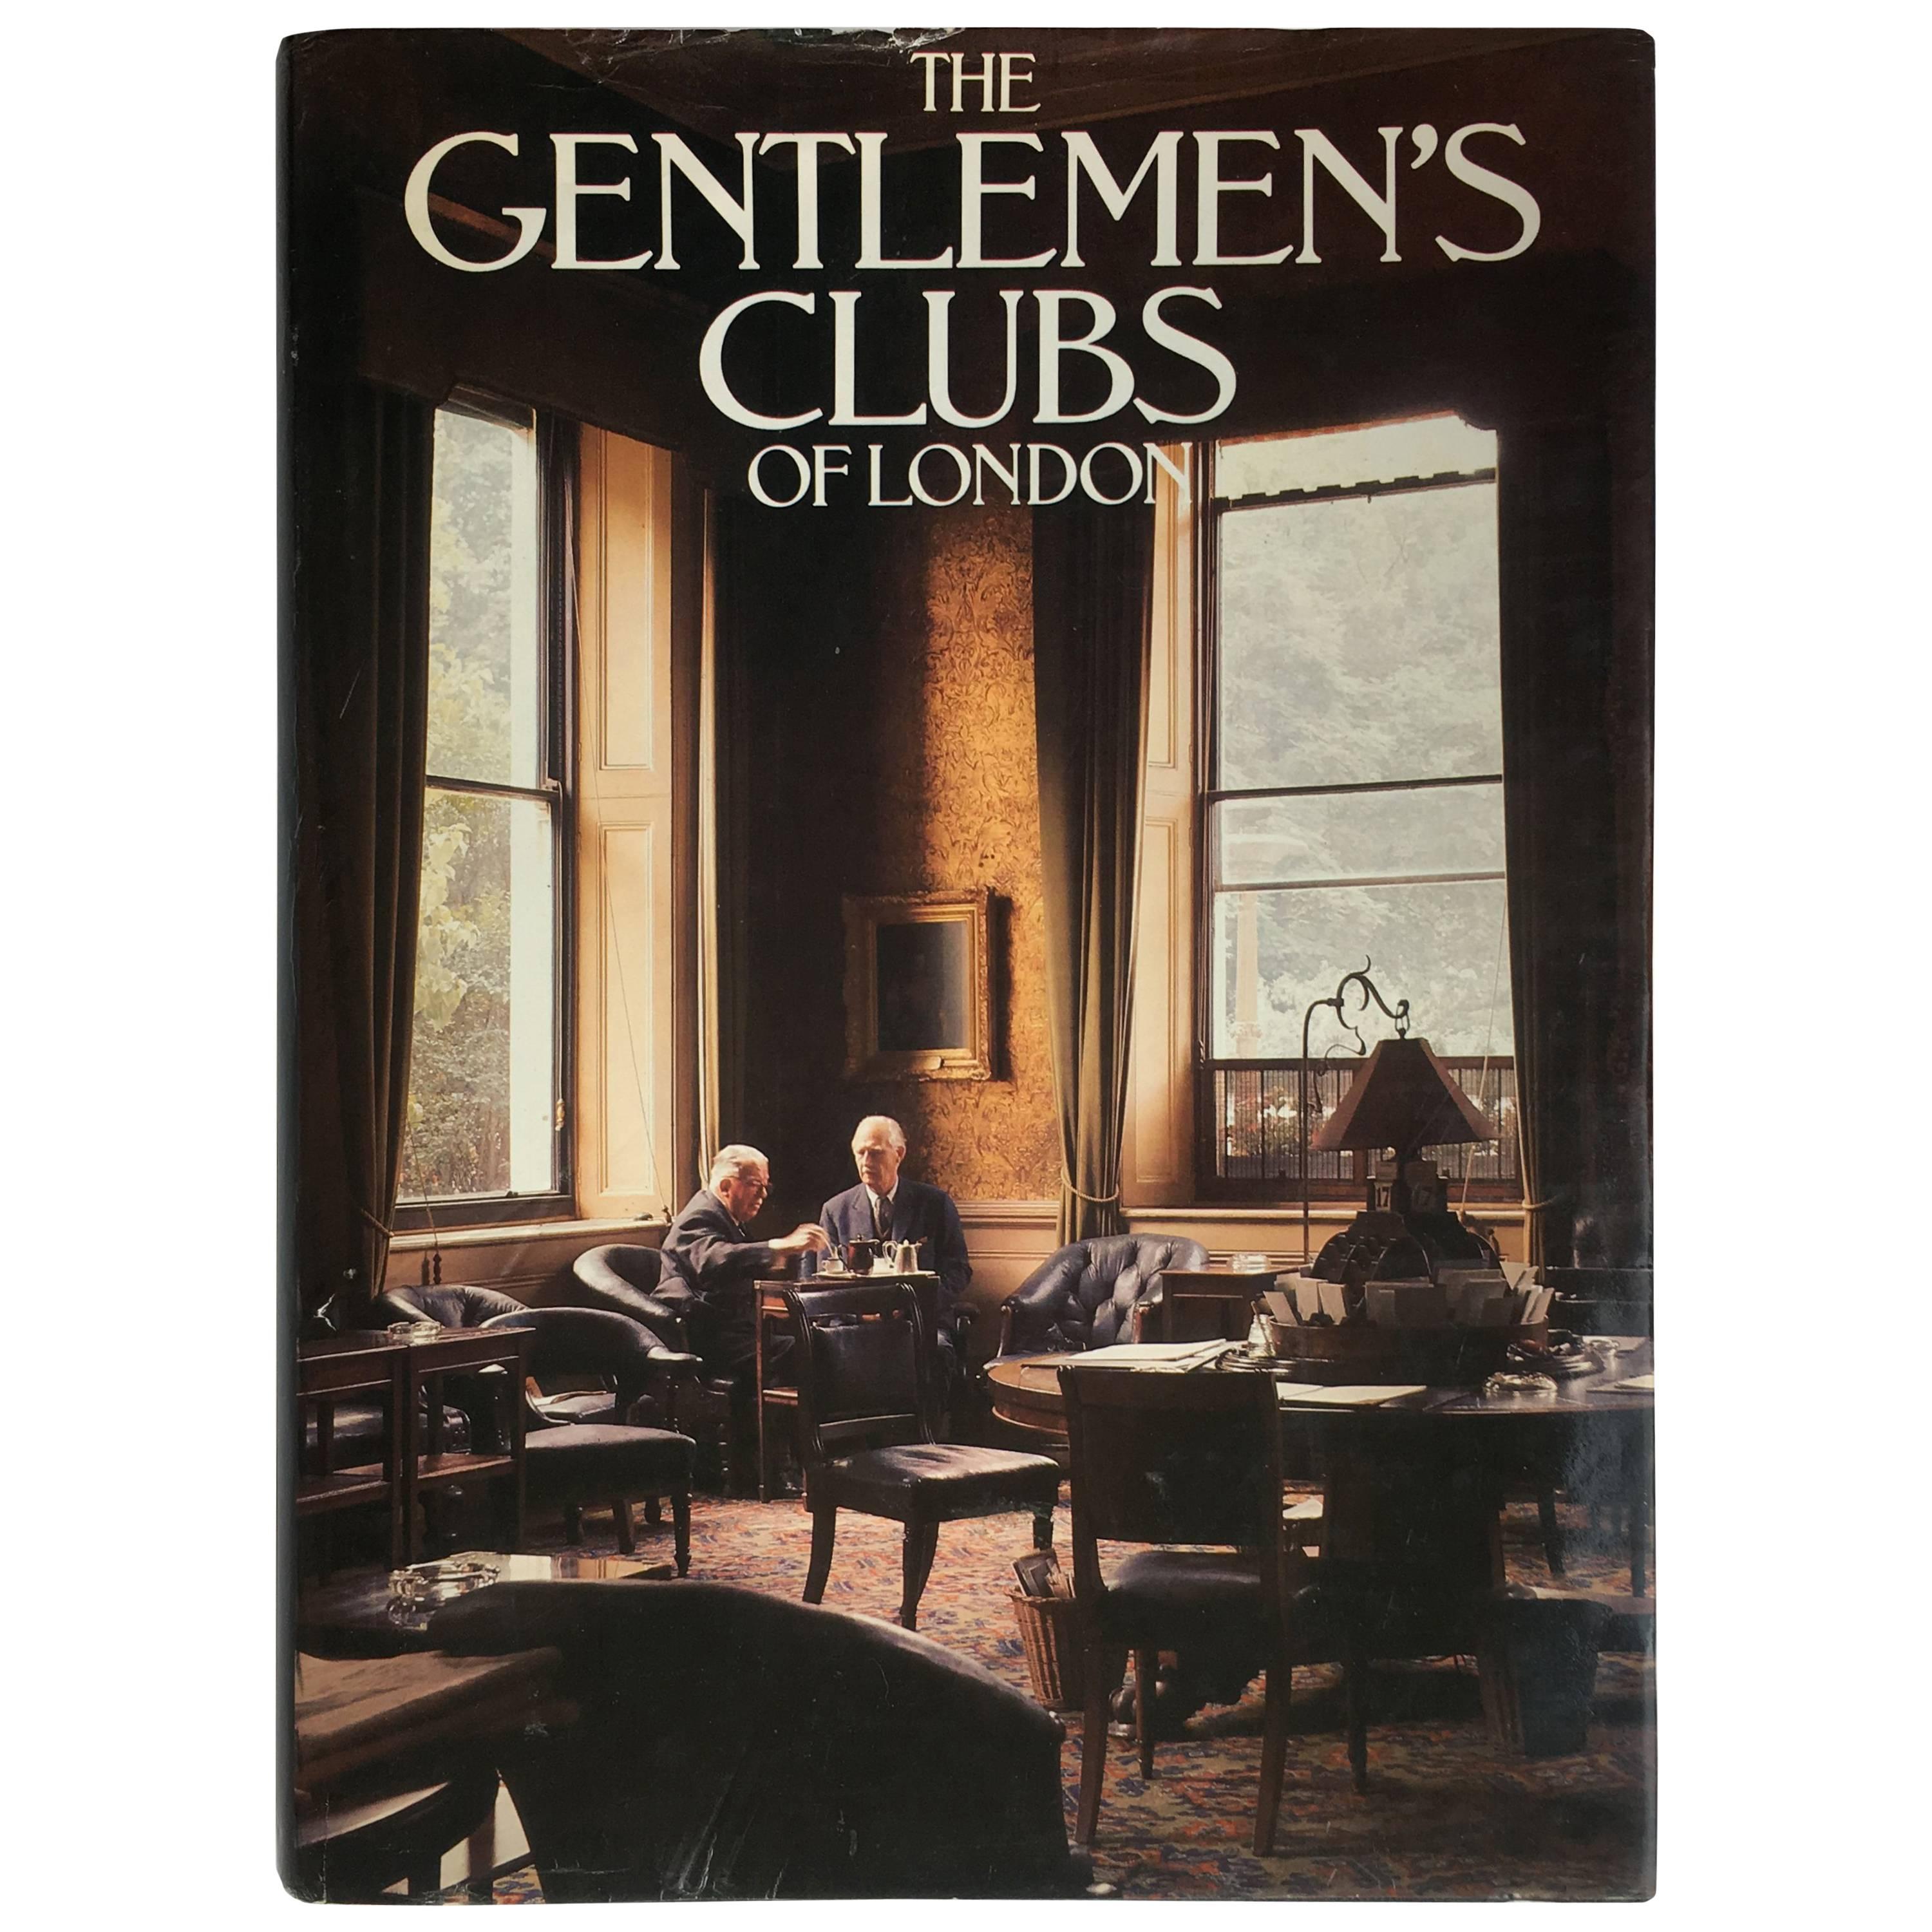 "The Gentleman’s Clubs of London – Anthony Lejeune & Malcolm Lewis" Book